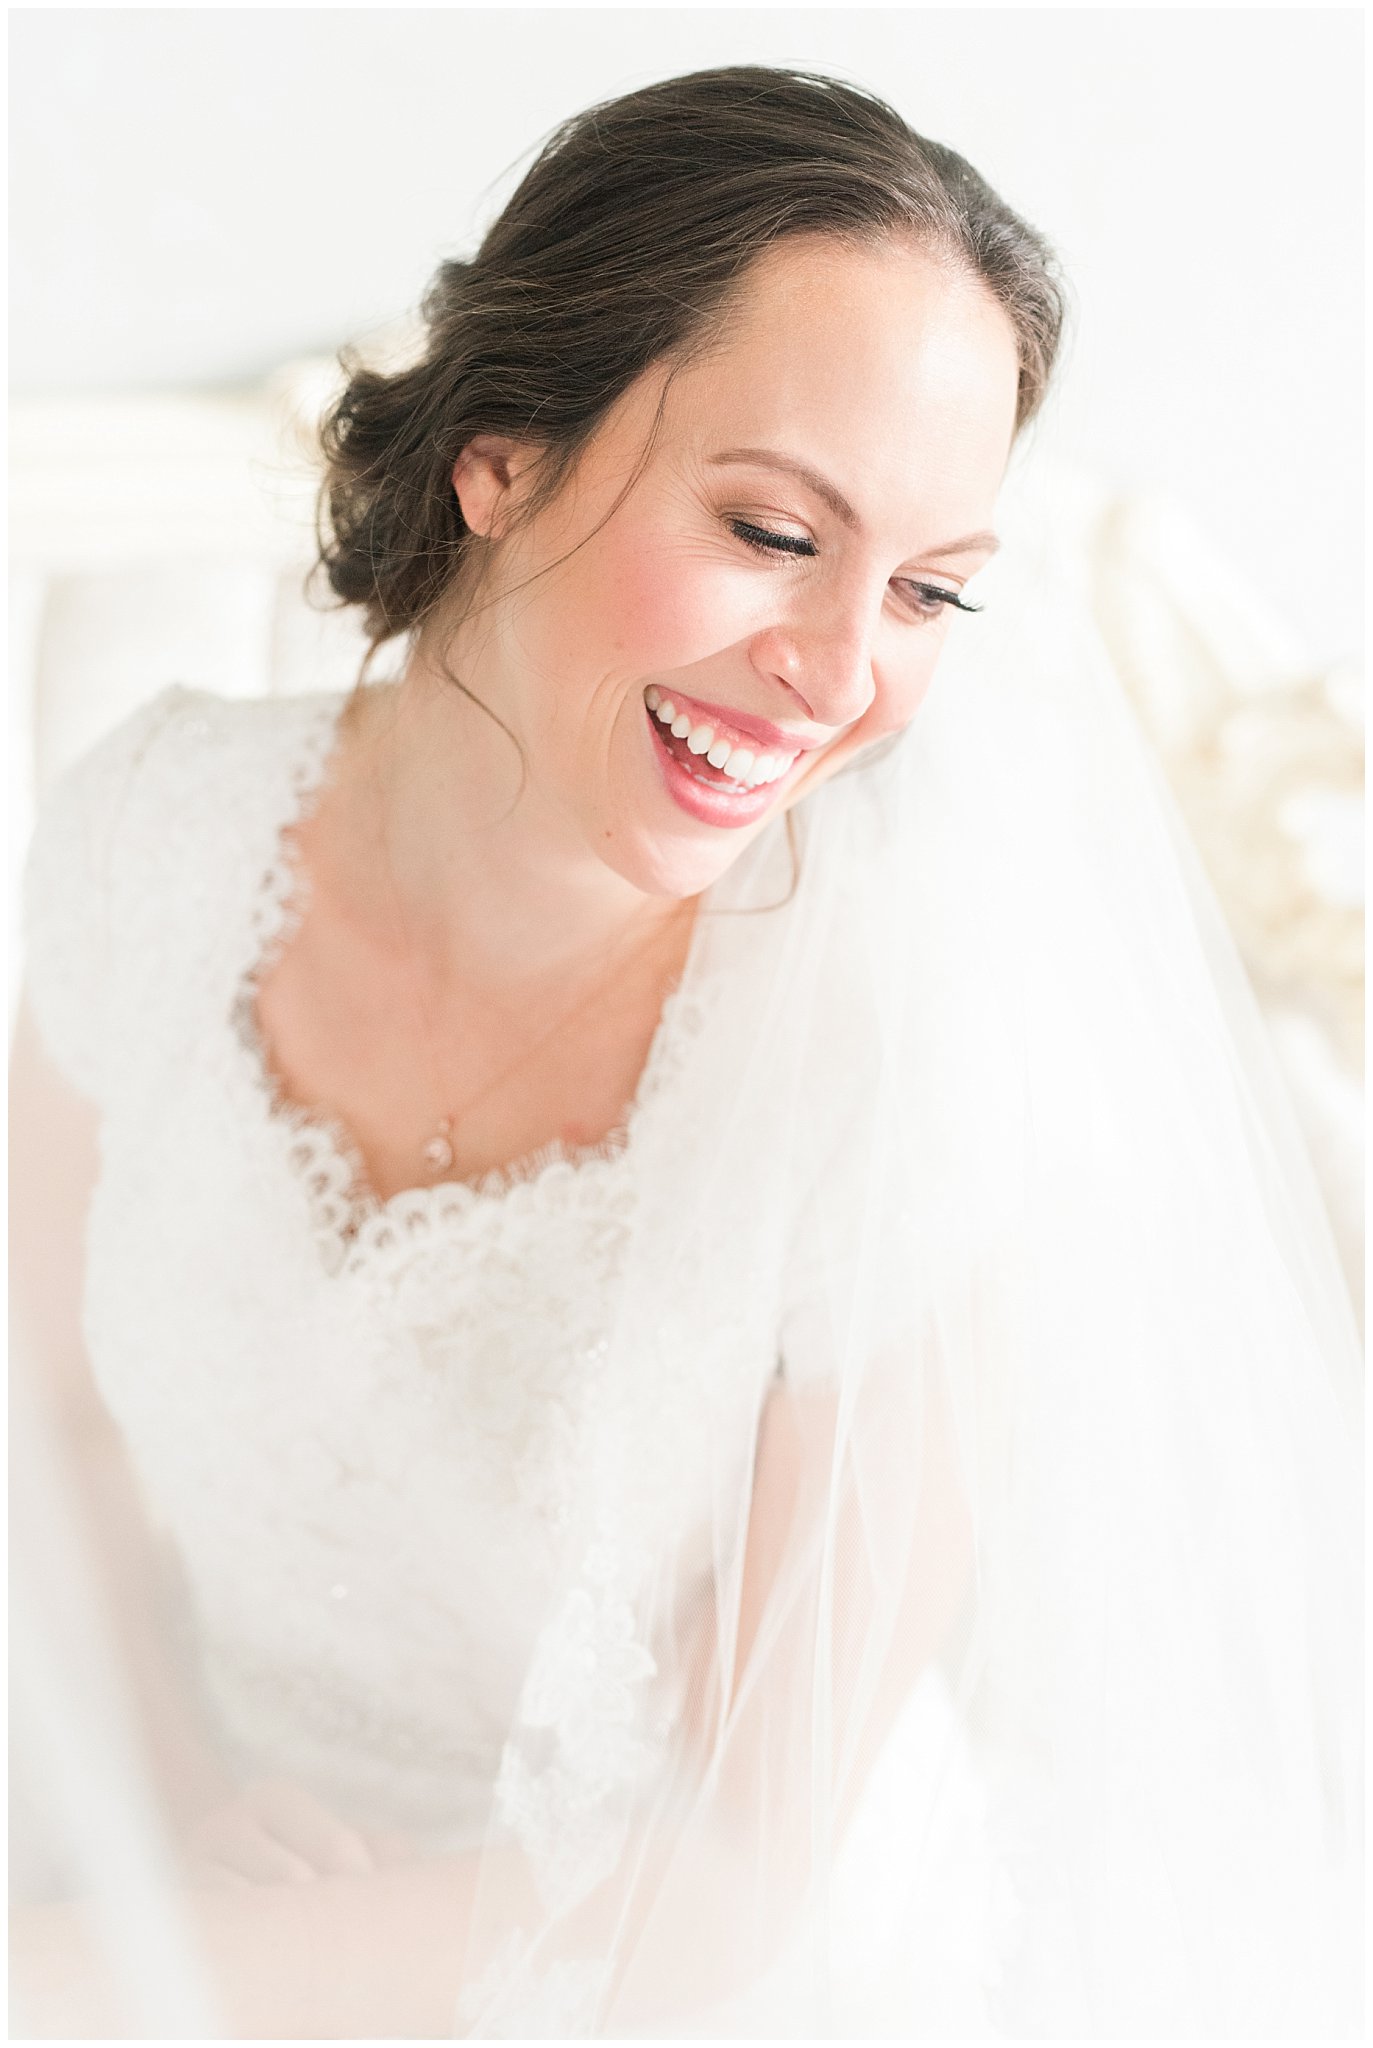 Bridal portrait with veil and dress from Latterydaybride at Oak Hills Reception and Event Center | Top Utah Wedding and Couples Photos 2019 | Jessie and Dallin Photography